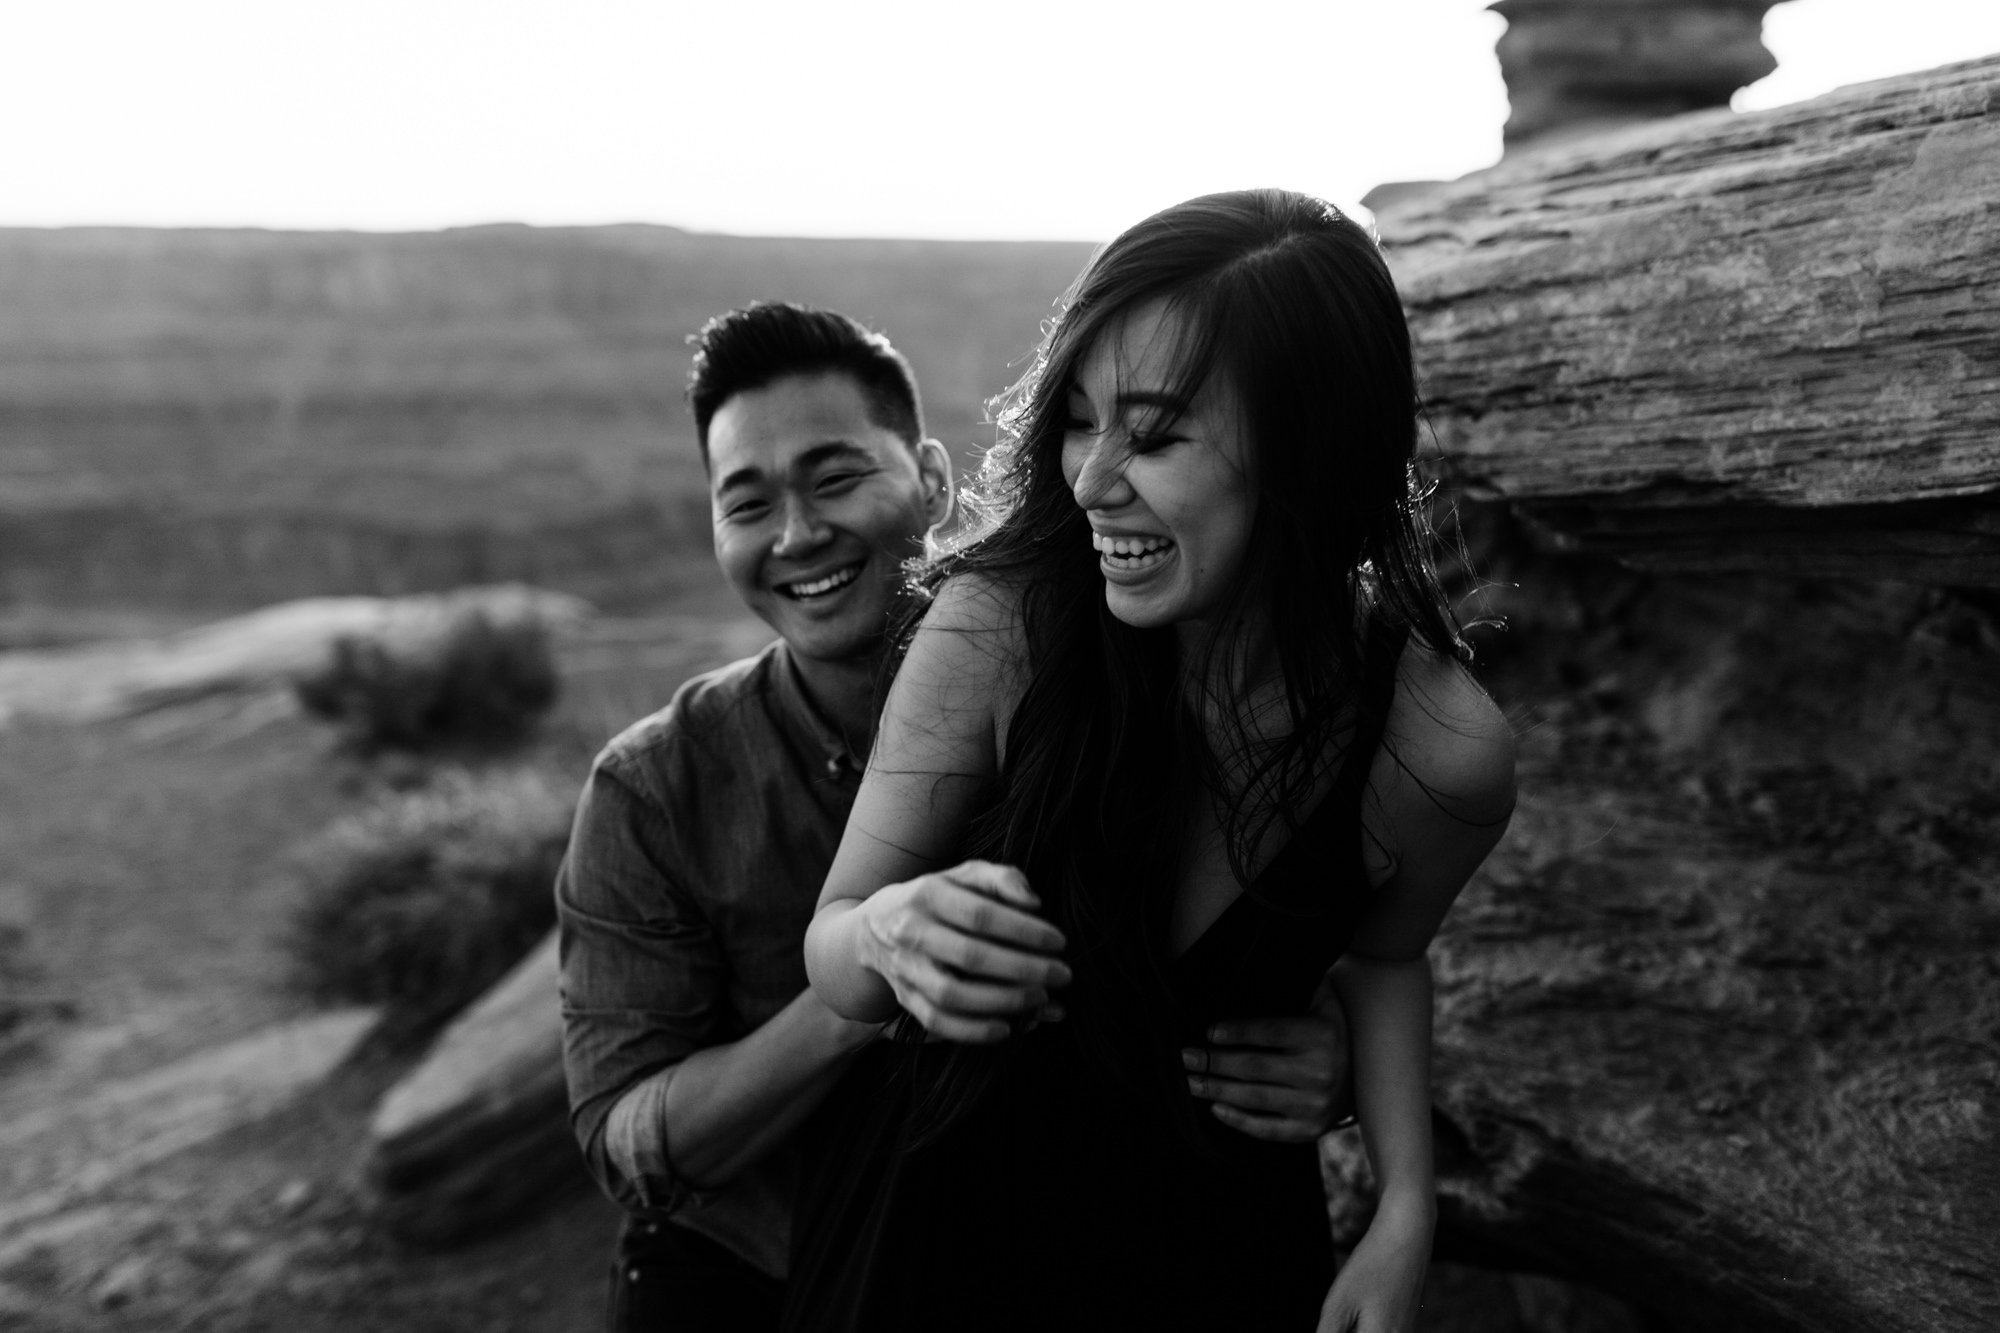 adventure engagement session in moab, utah | destination engagement photo inspiration | utah adventure elopement photographers | the hearnes adventure photography | www.thehearnes.com